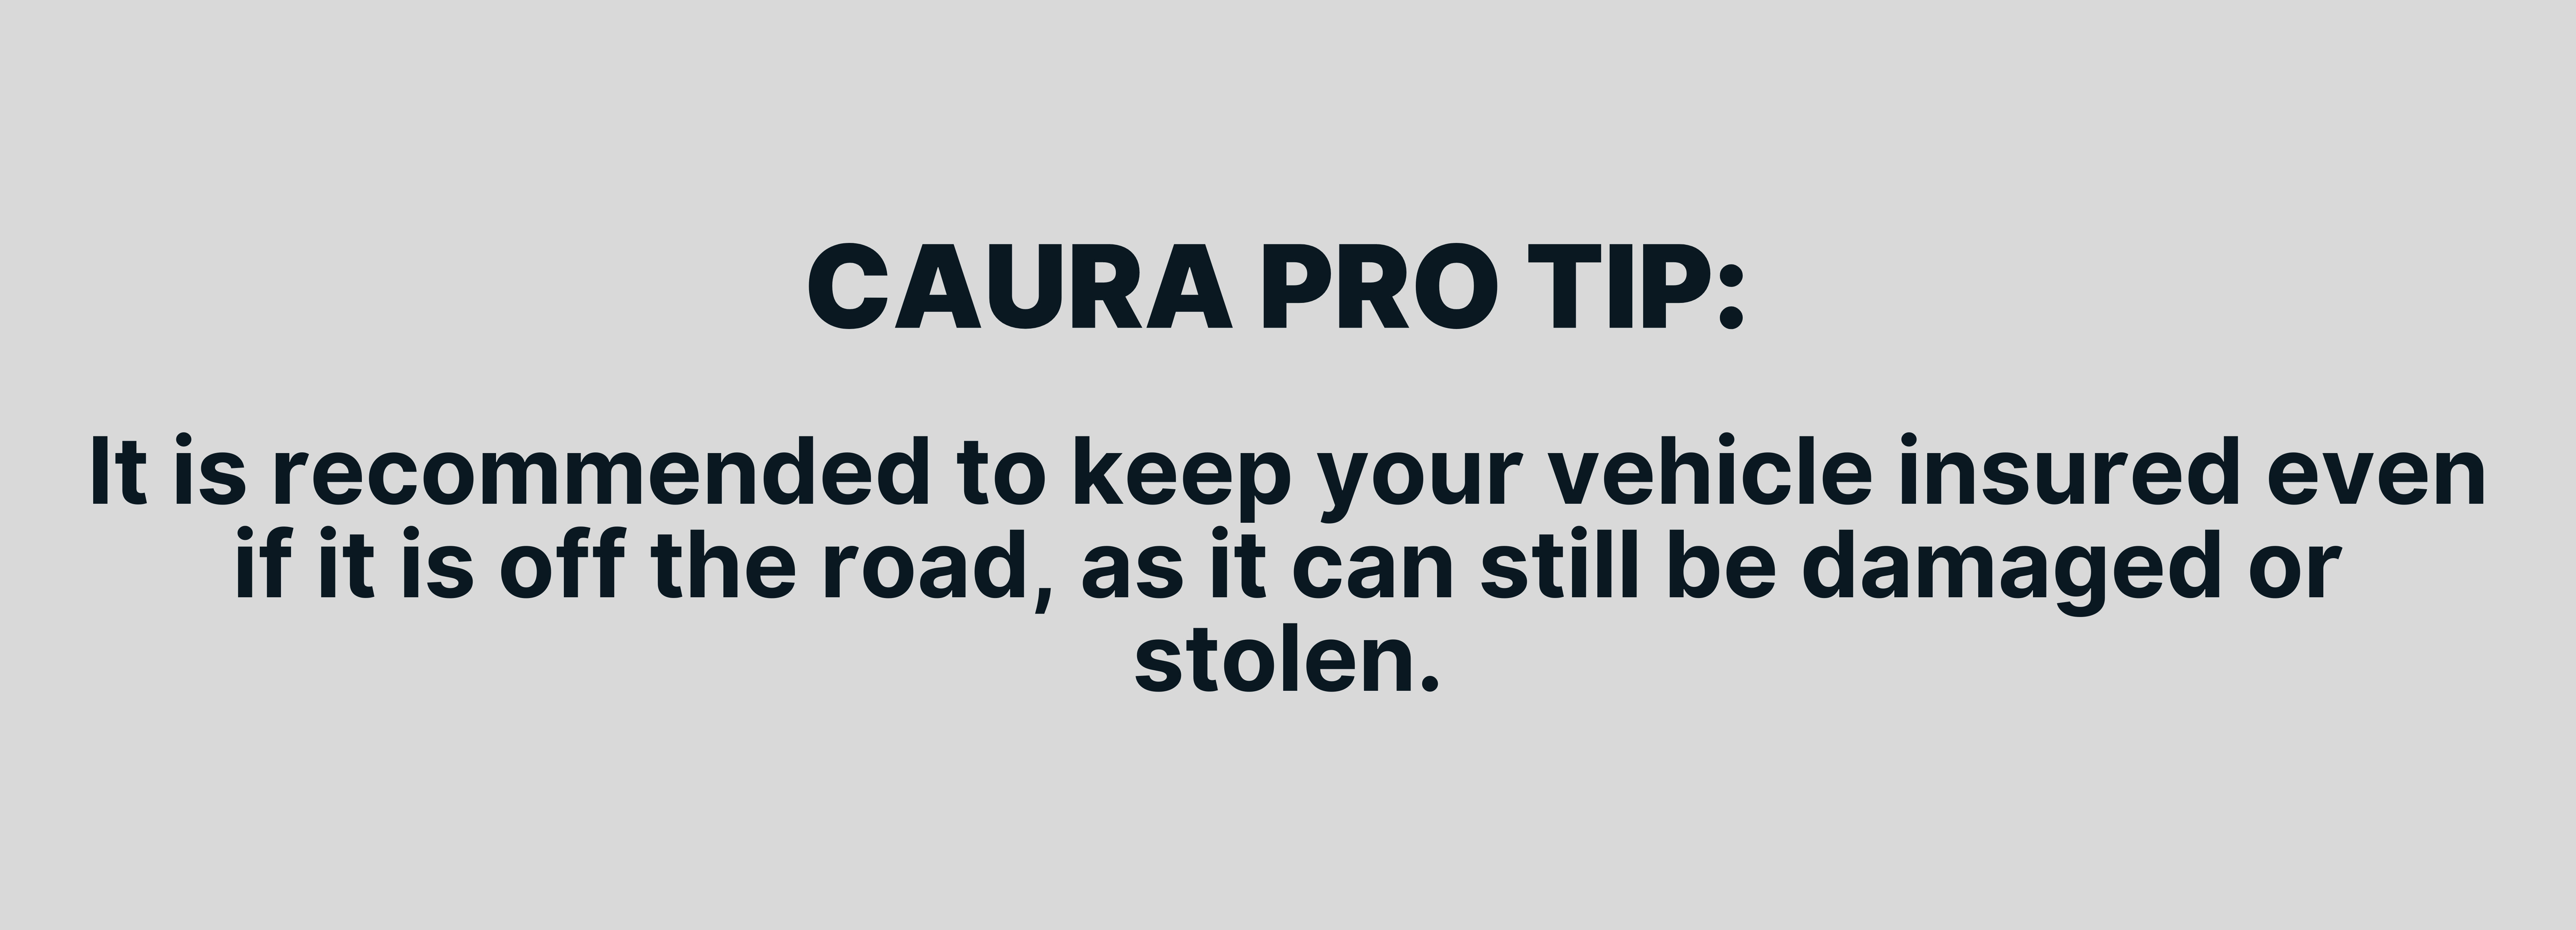 It is recommended to keep your vehicle insured even if it is off the road, as it can still be damaged or stolen.